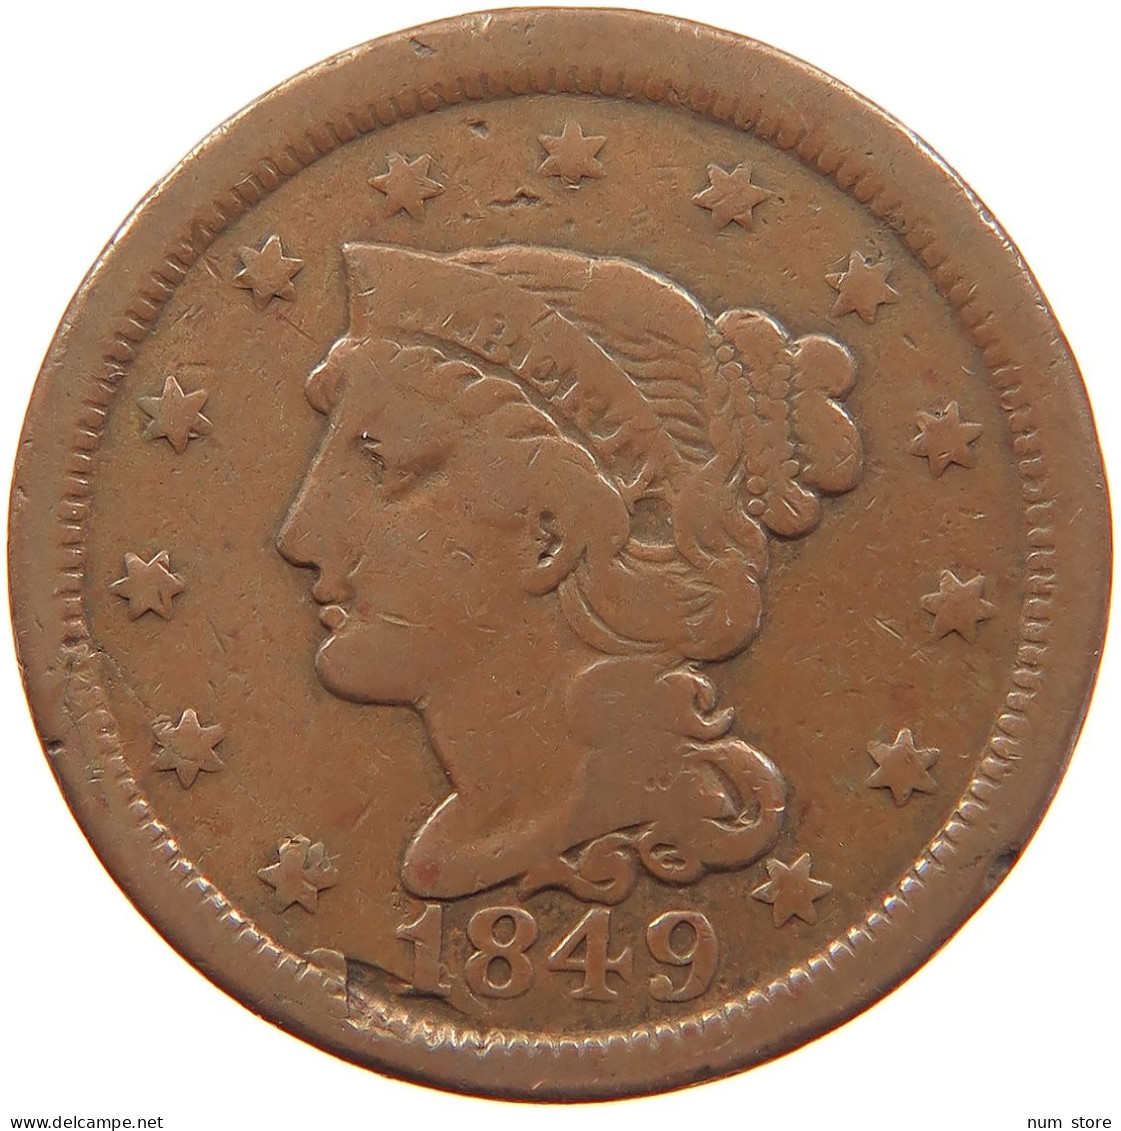 UNITED STATES OF AMERICA LARGE CENT 1849 Braided Hair #t143 0405 - 1840-1857: Braided Hair (Cheveux Tressés)